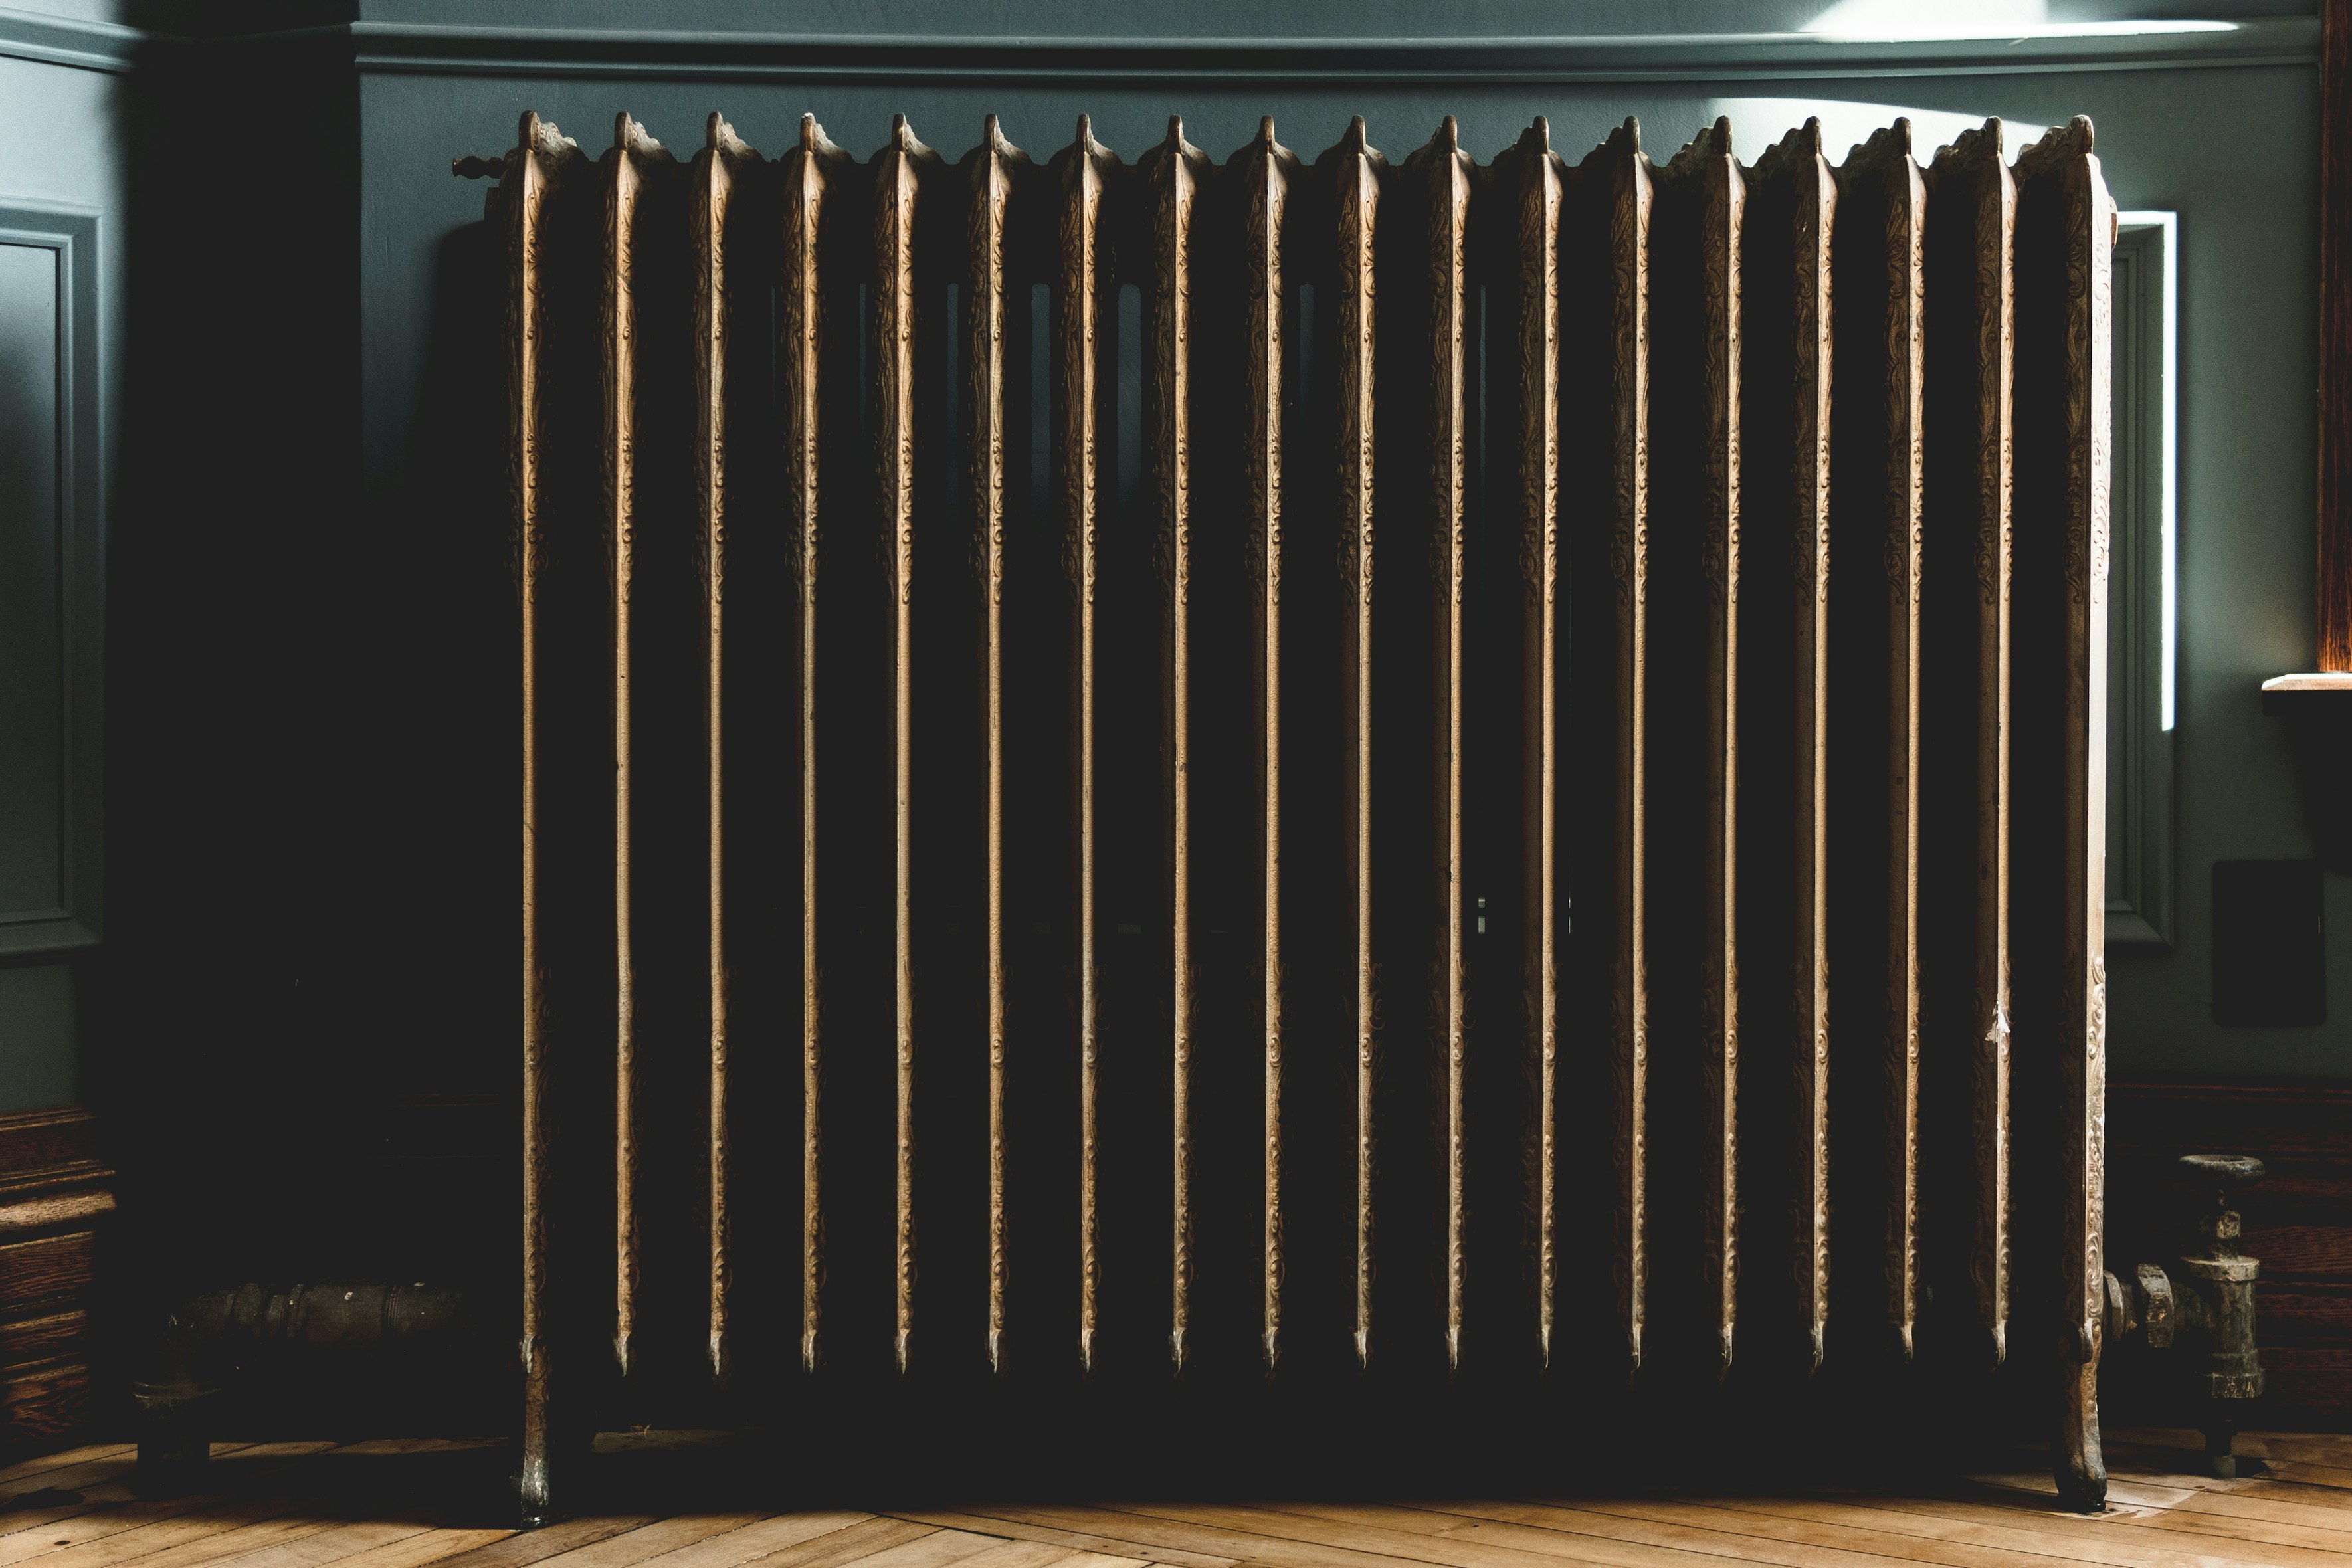 A radiator in a home.